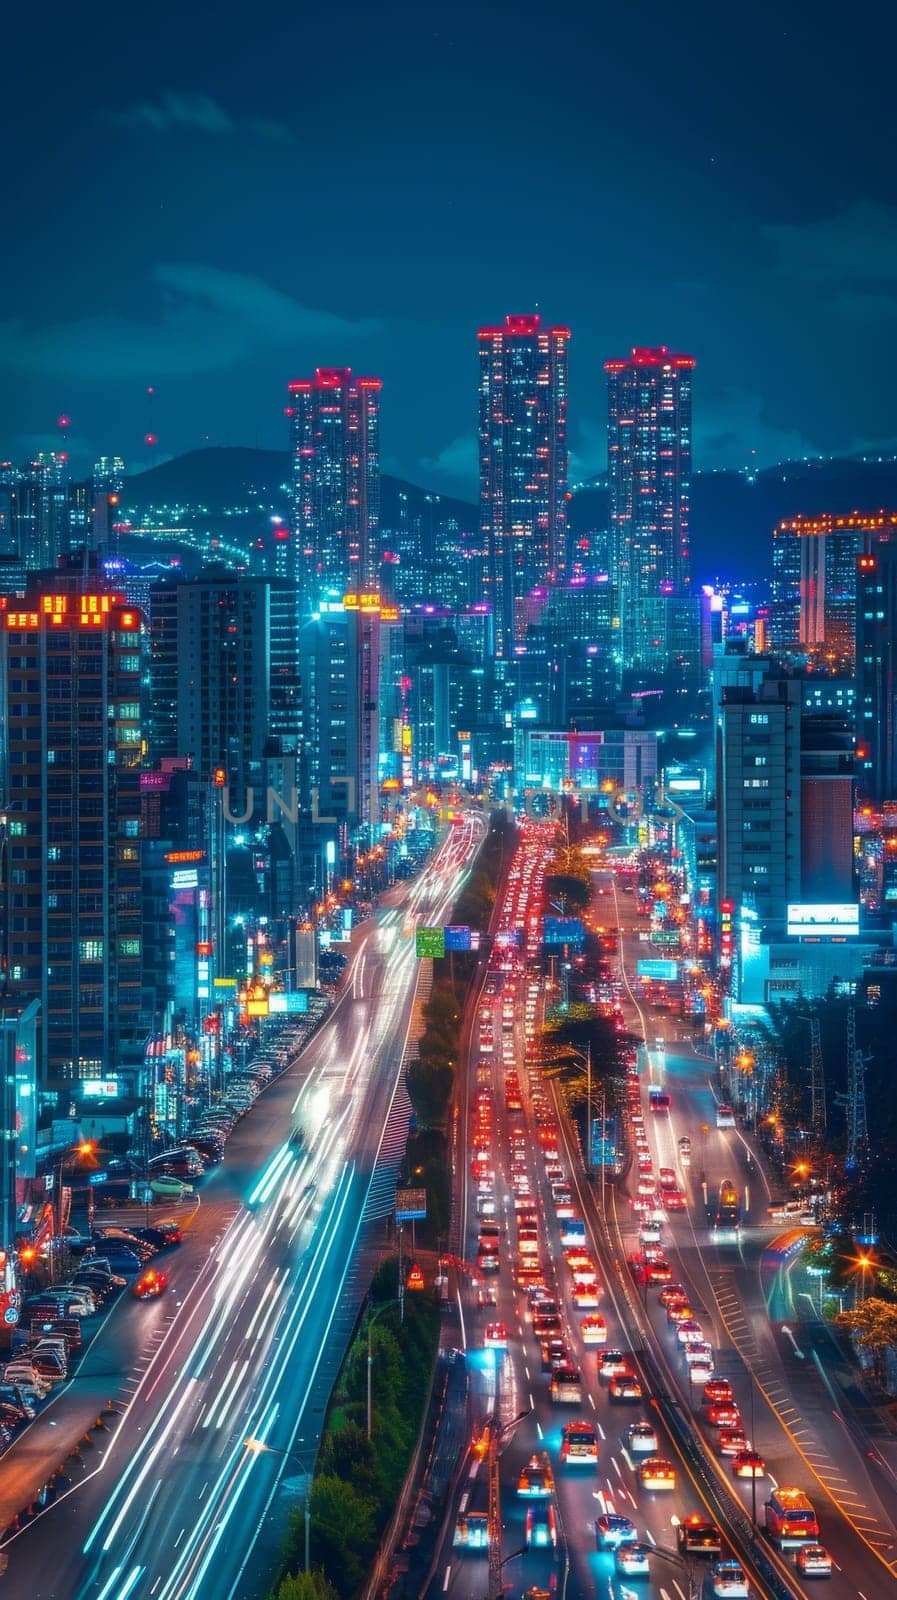 A city at night with a lot of traffic and a lot of lights. The lights are neon and the city is very busy